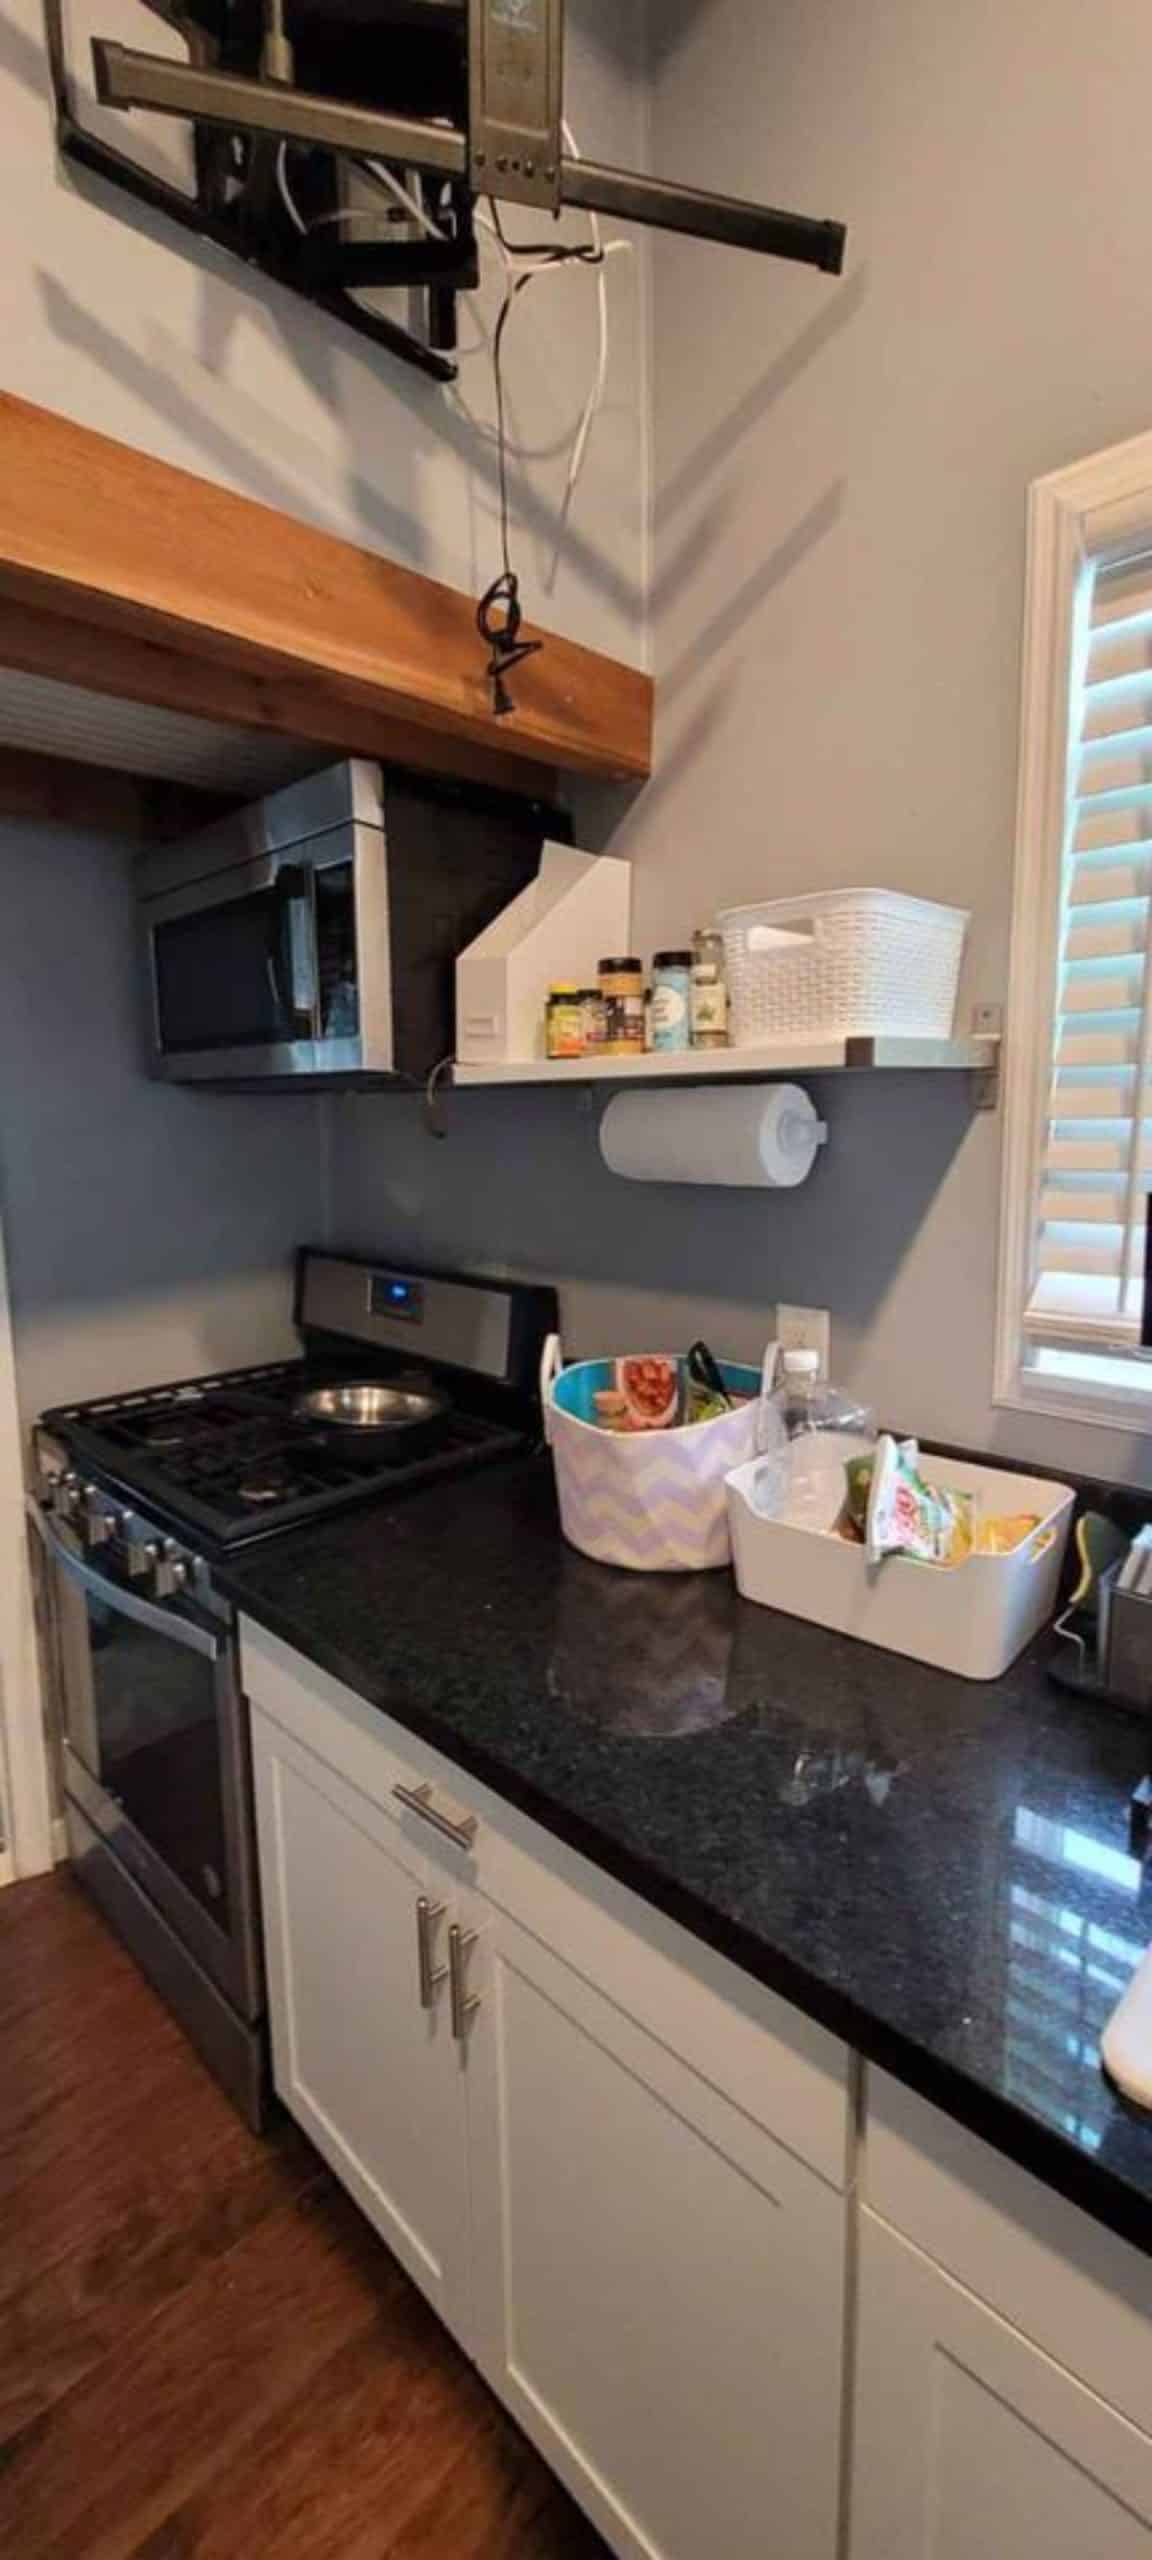 kitchen of 24' one bedroom tiny house is compact yet well organized